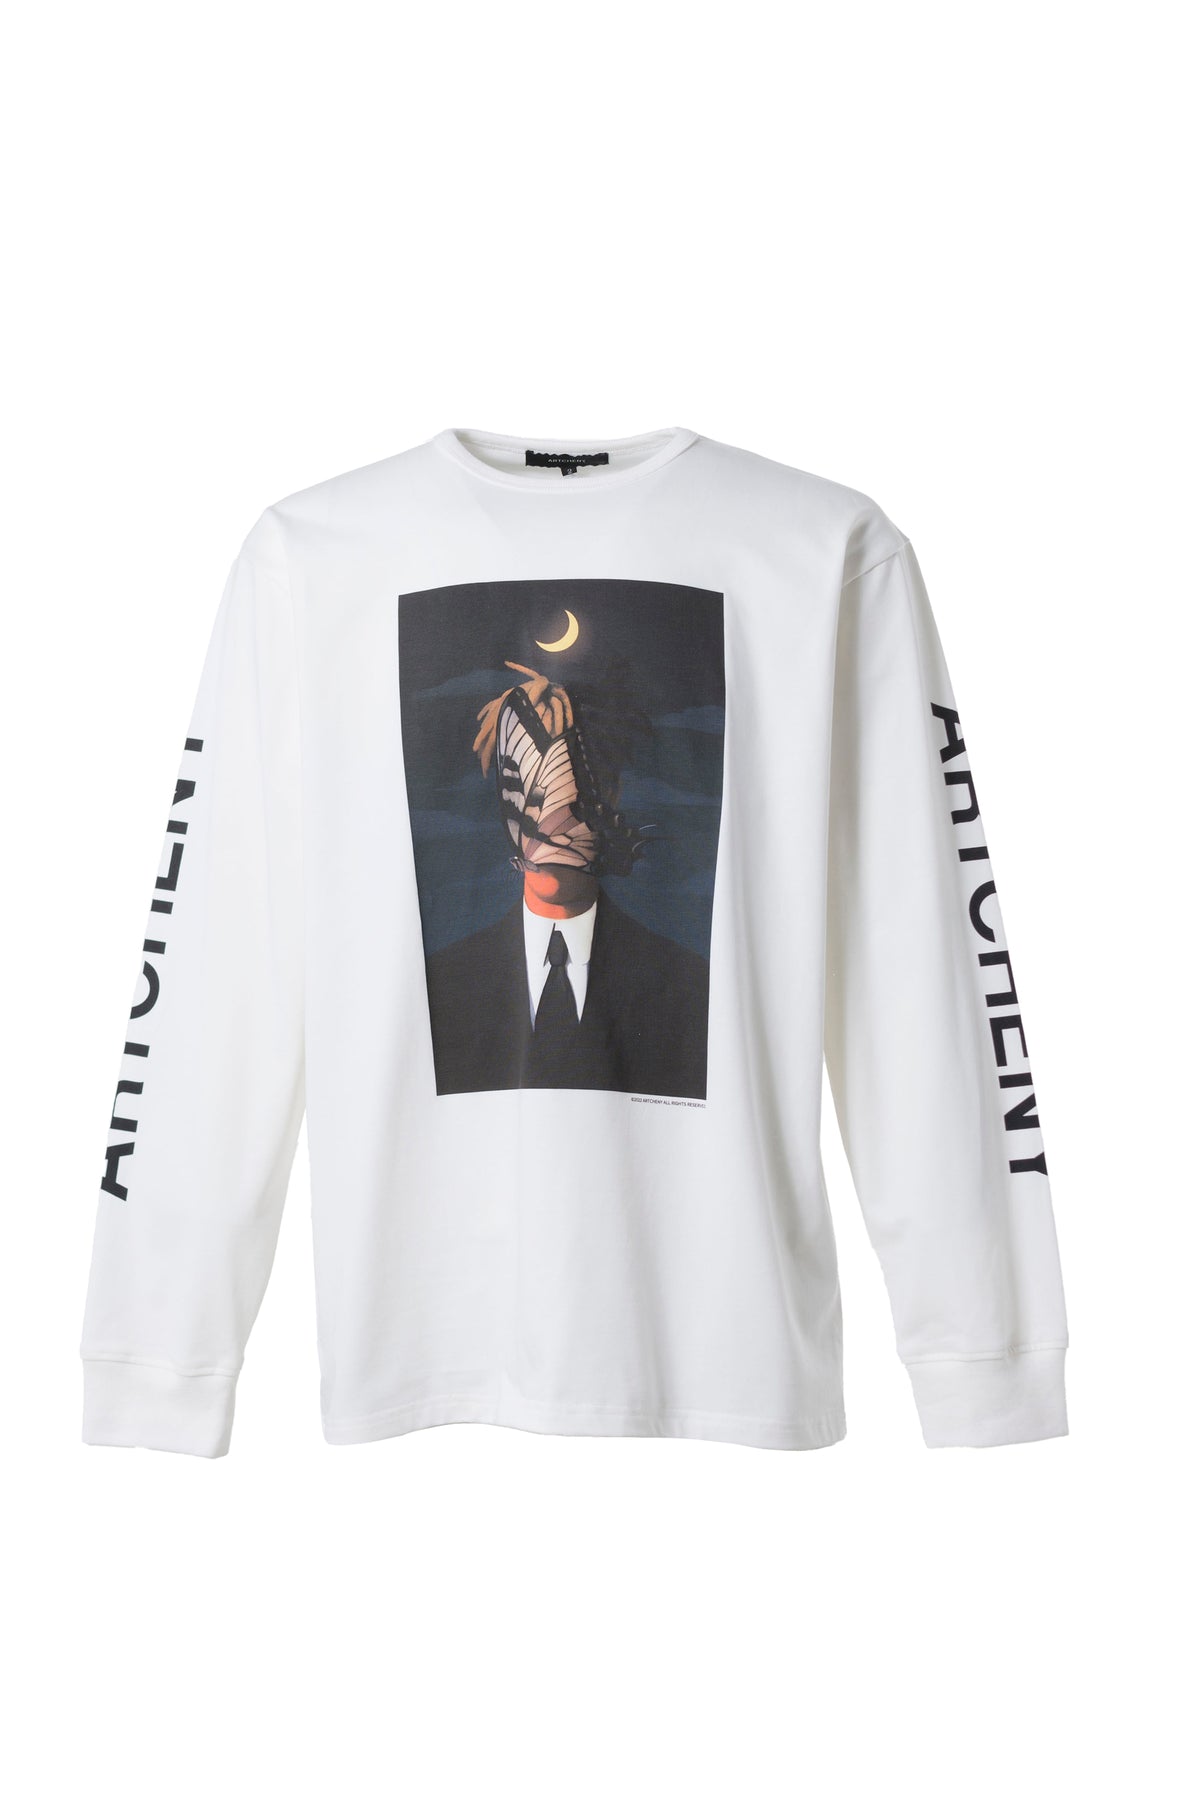 ARTCHENY LONG SLEEVE T-SHIRTS NIGHTMARE / WHT